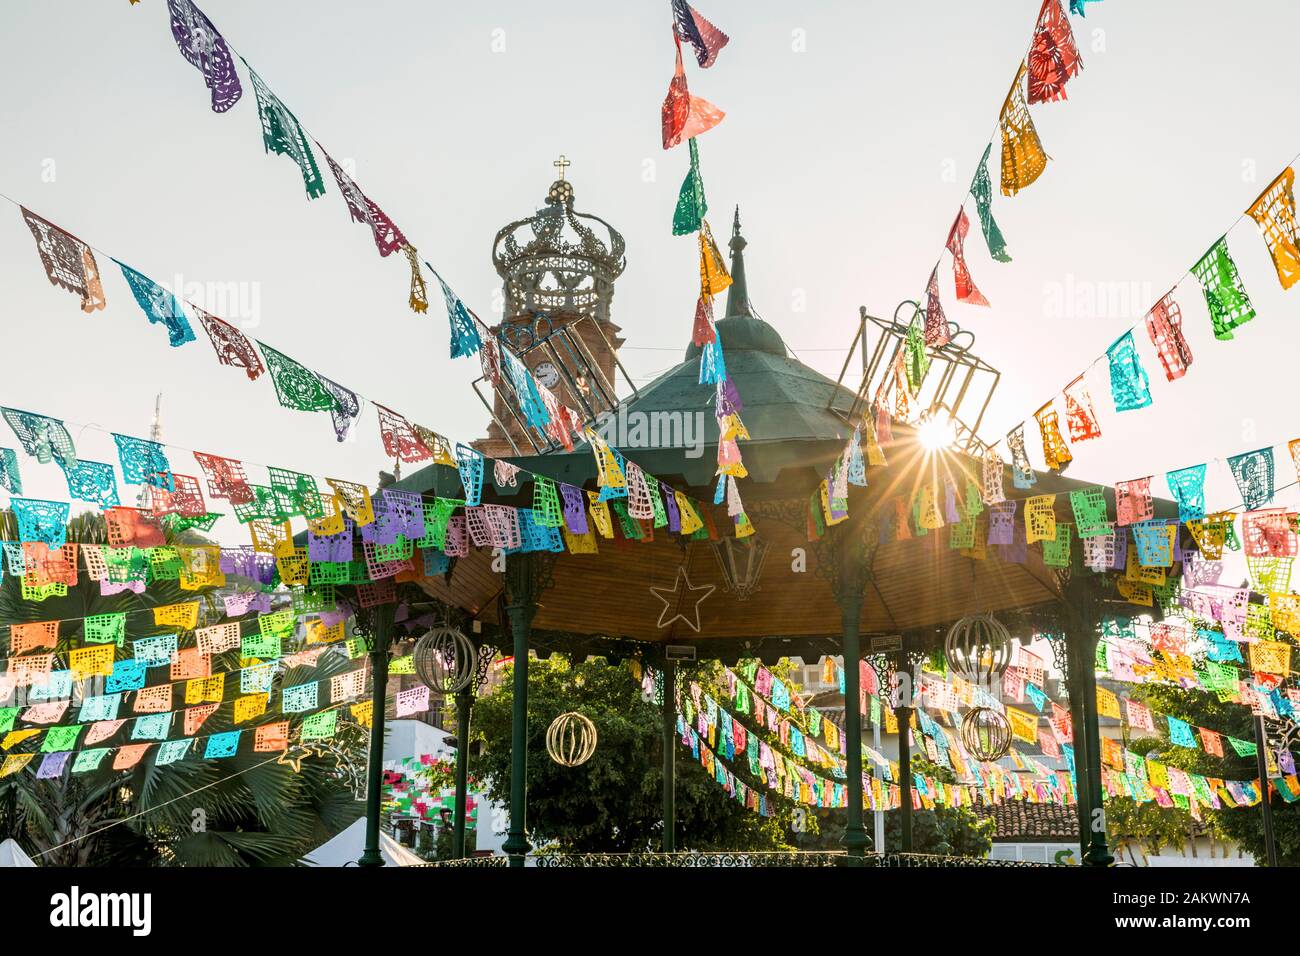 Mexico, Puerto Vallarta, Jalisco, bandstand decorated for a festival at sunrise Stock Photo